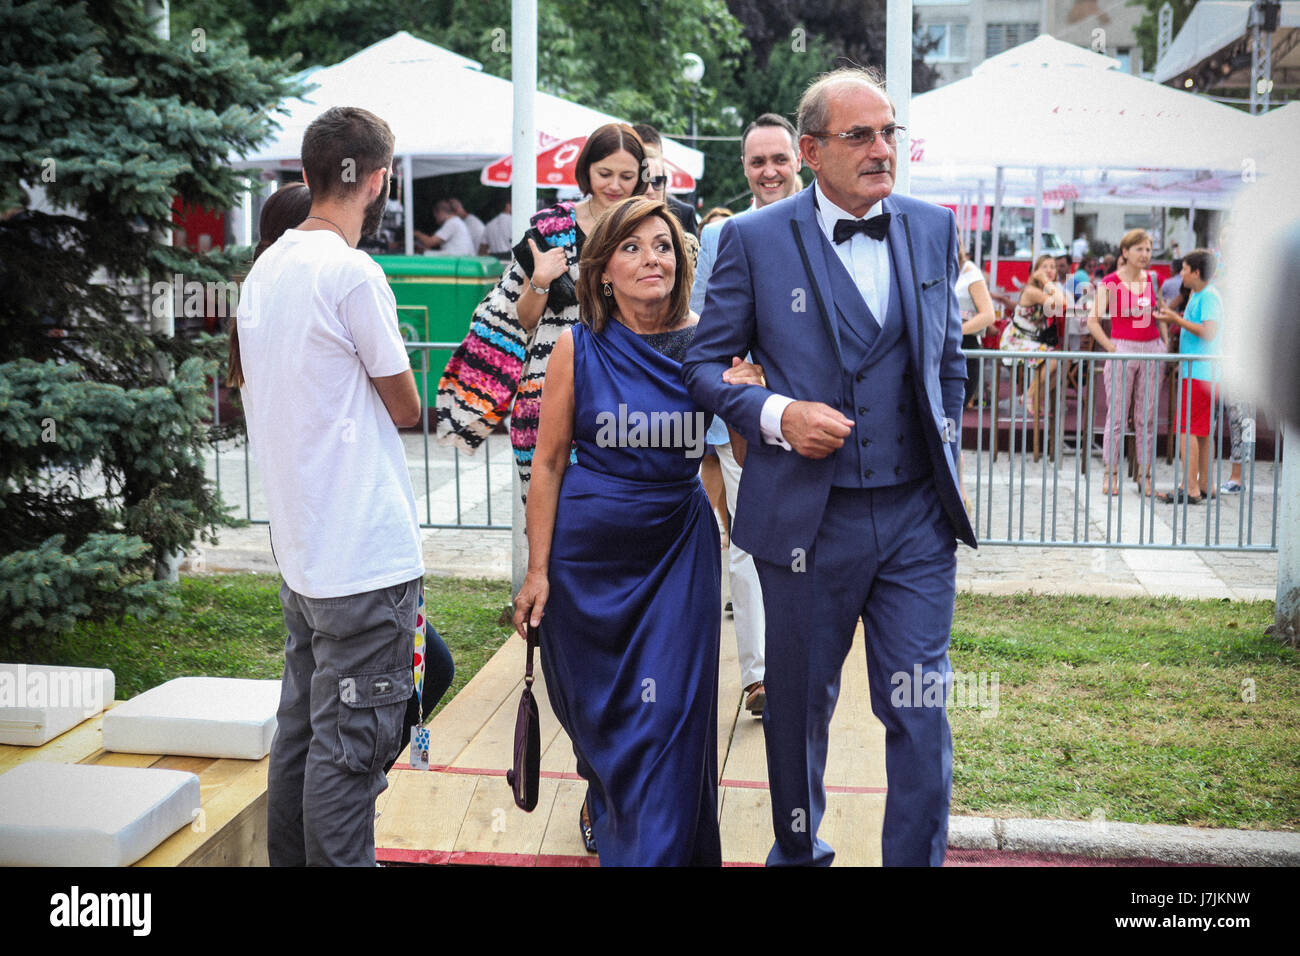 Nijaz Hastor (R) and his wife Mirsada Hastor (L) arrives in welcome drink before opening of 21st Sarajevo Film Festival in 2015. Stock Photo